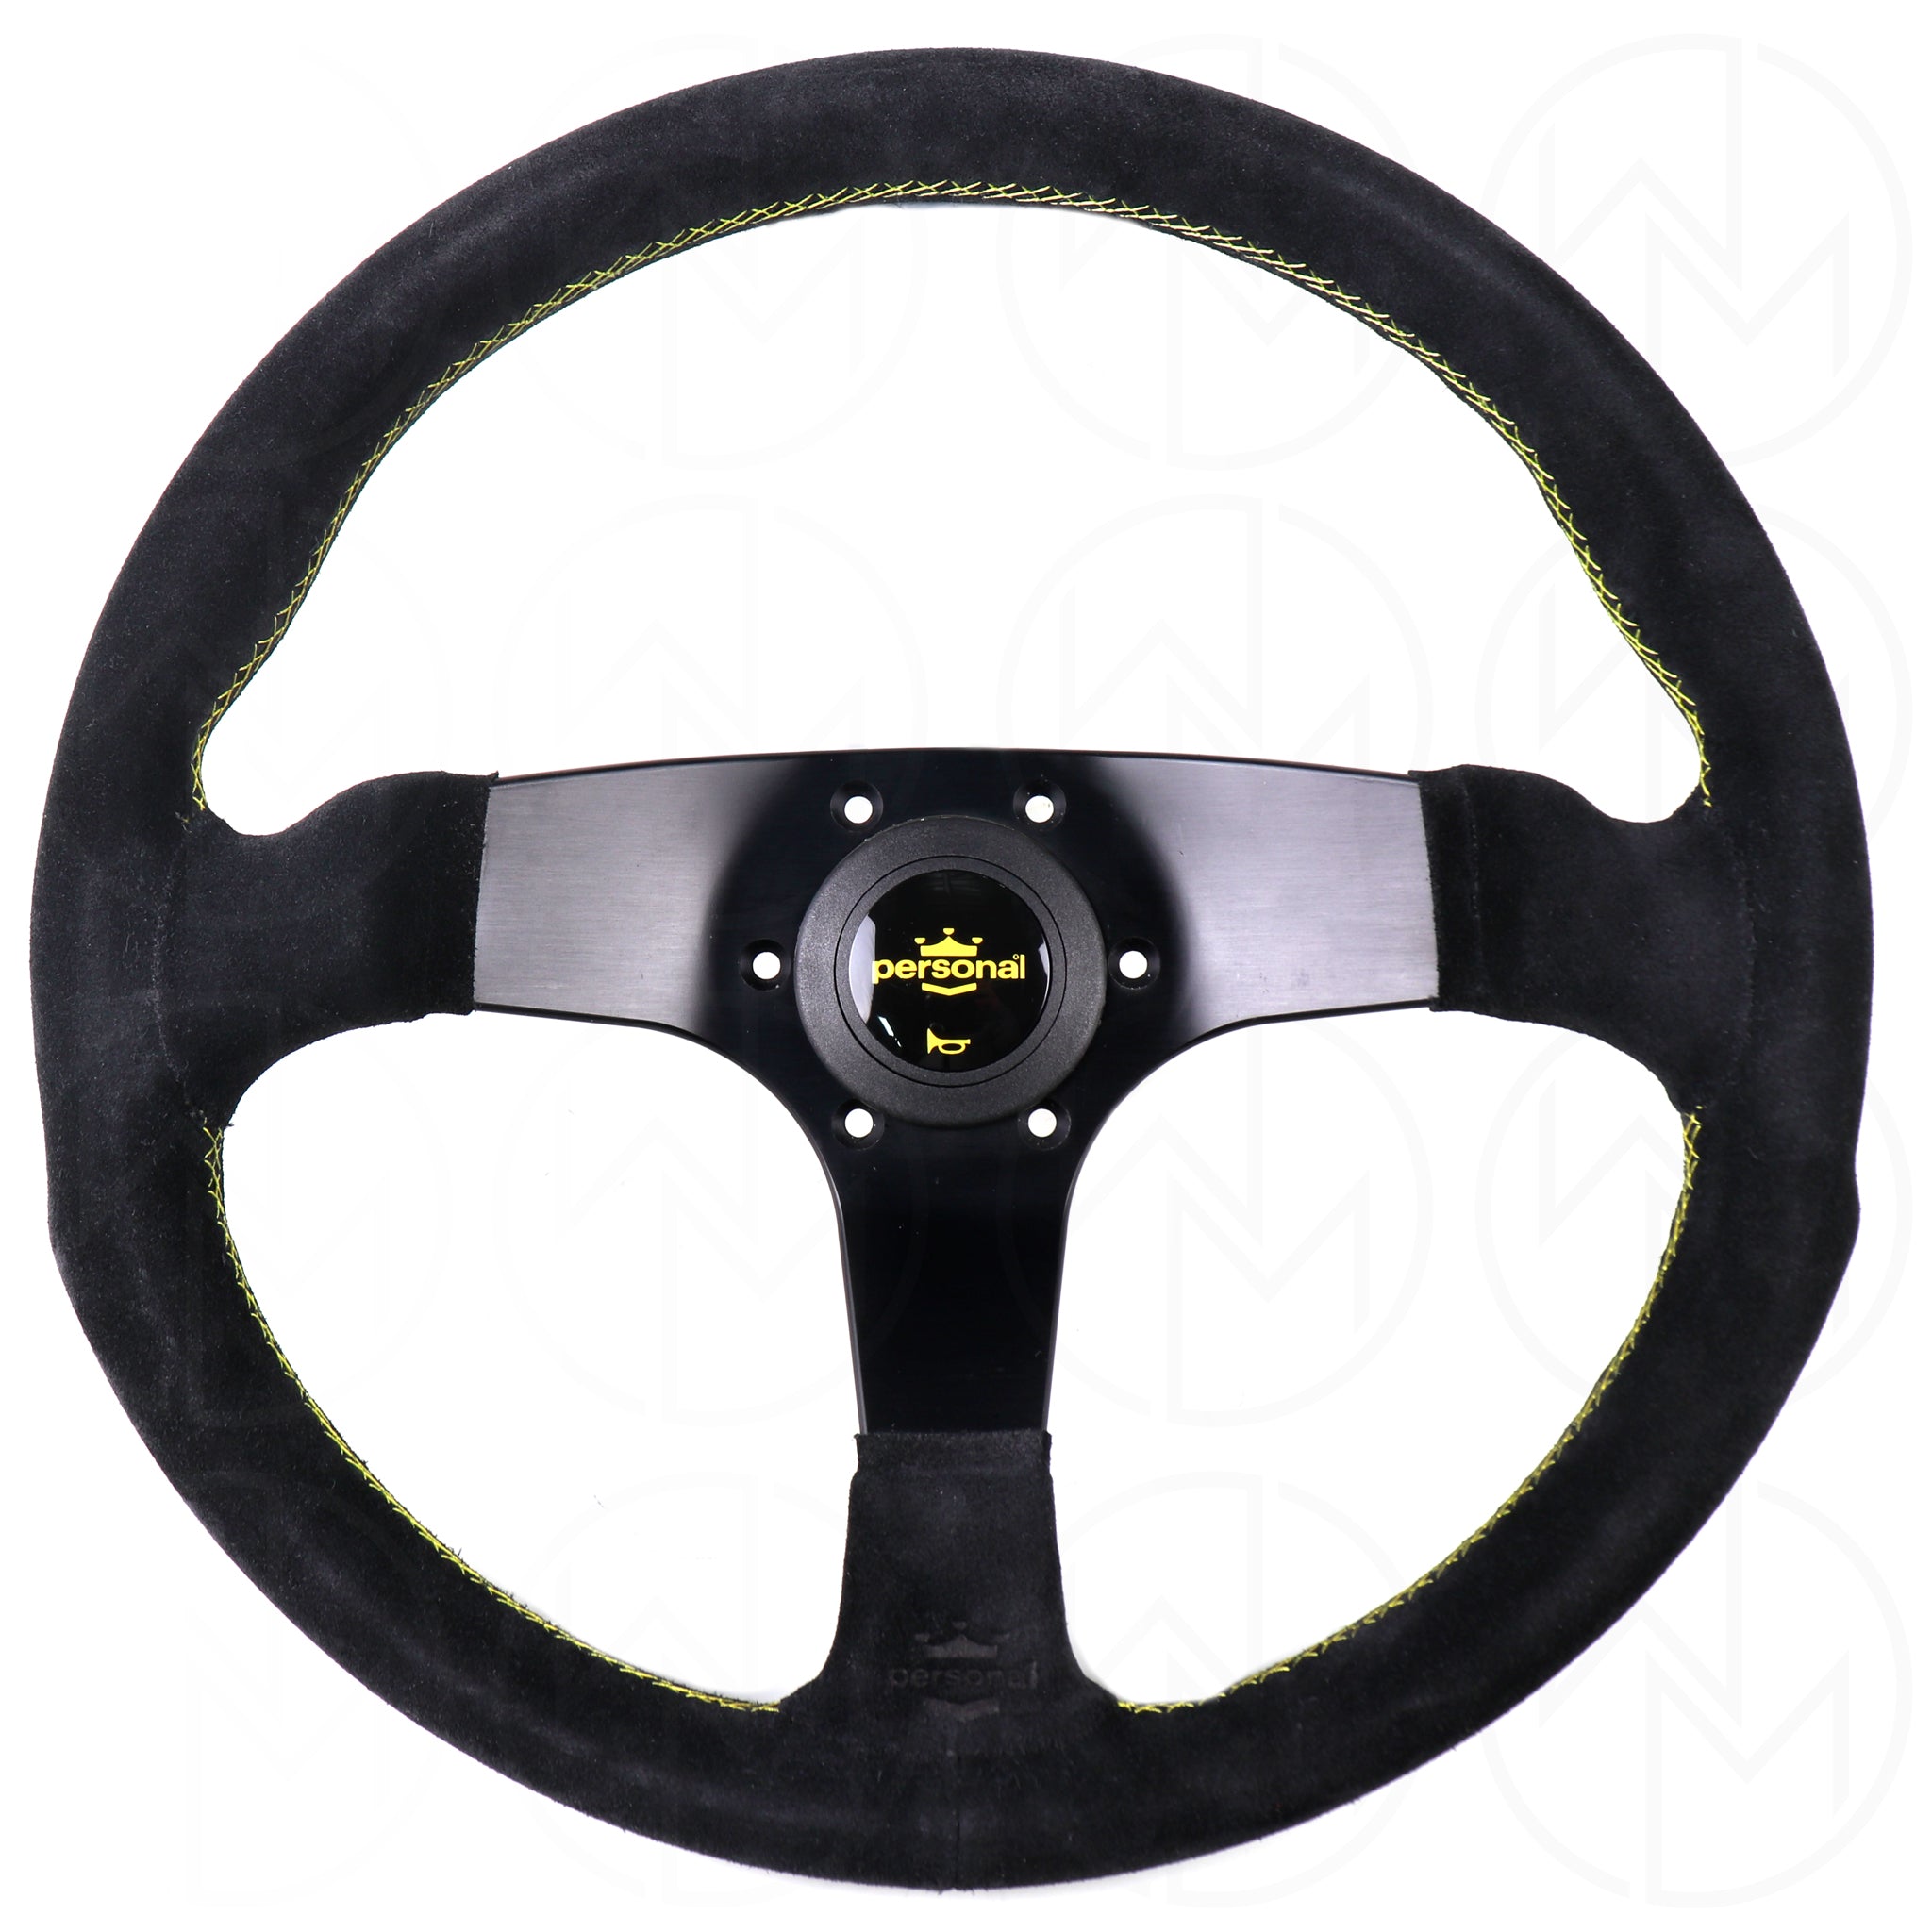 Personal Fitti Corsa Steering Wheel - 350mm Suede w/Yellow Stitch